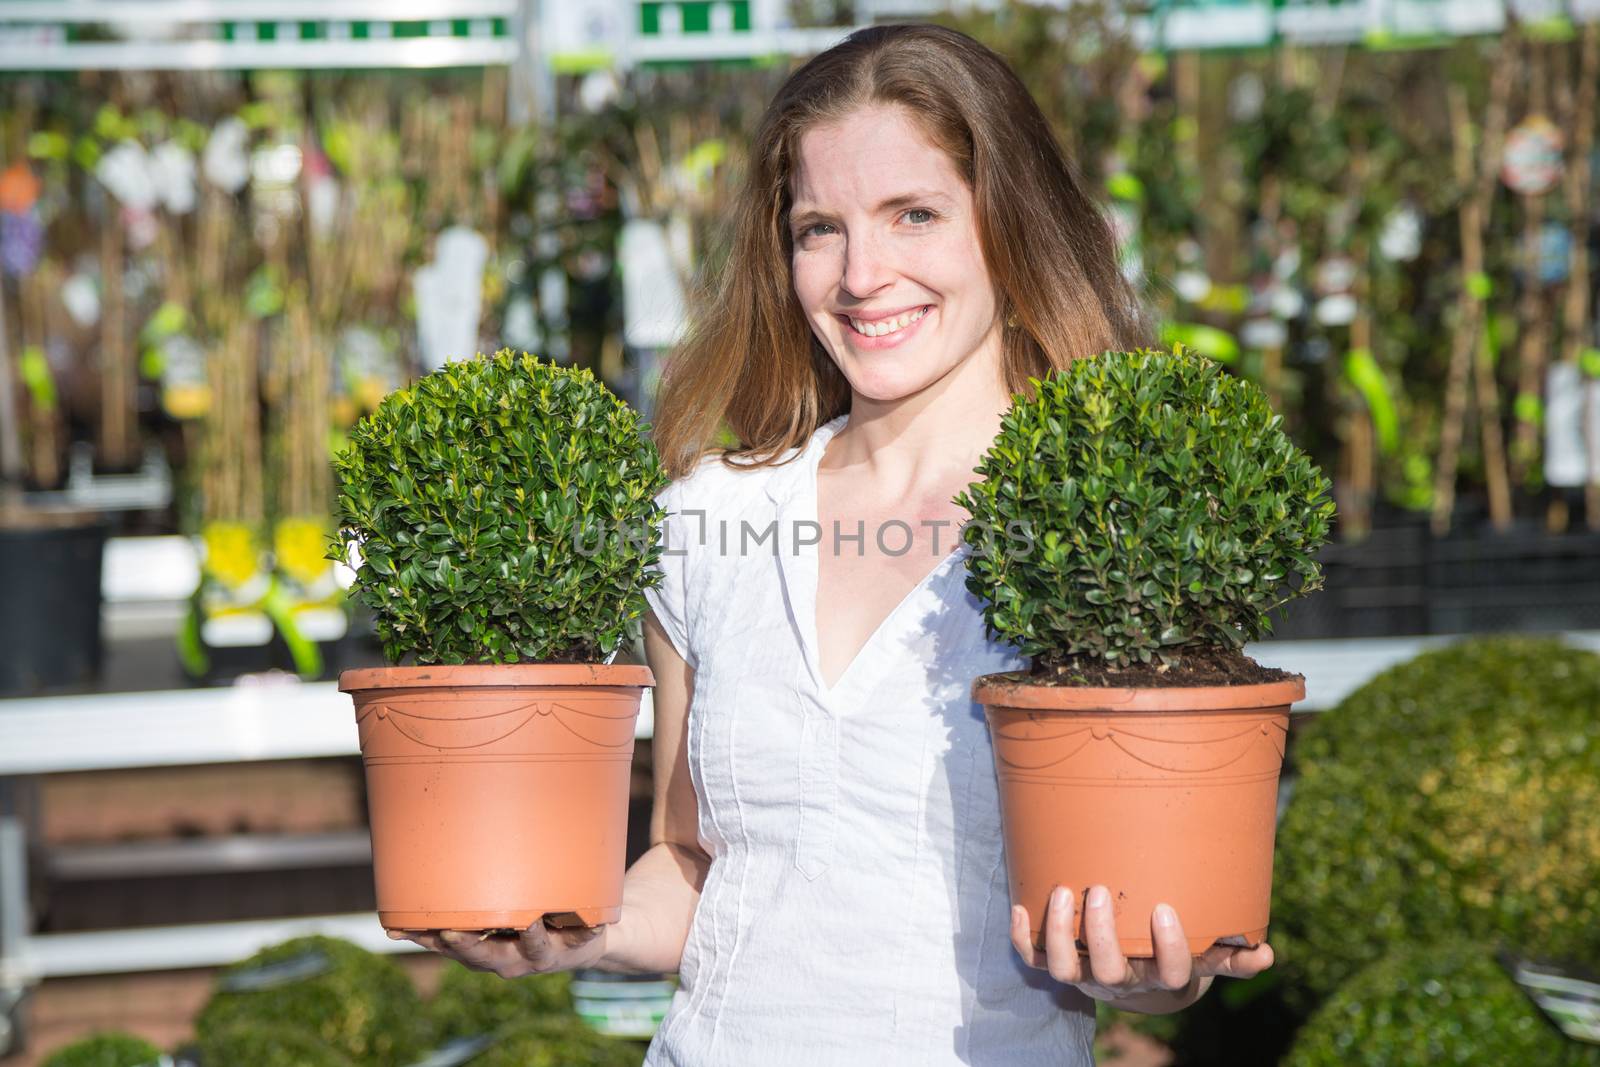 Customer in garden center posing with two boxtrees by ikonoklast_fotografie